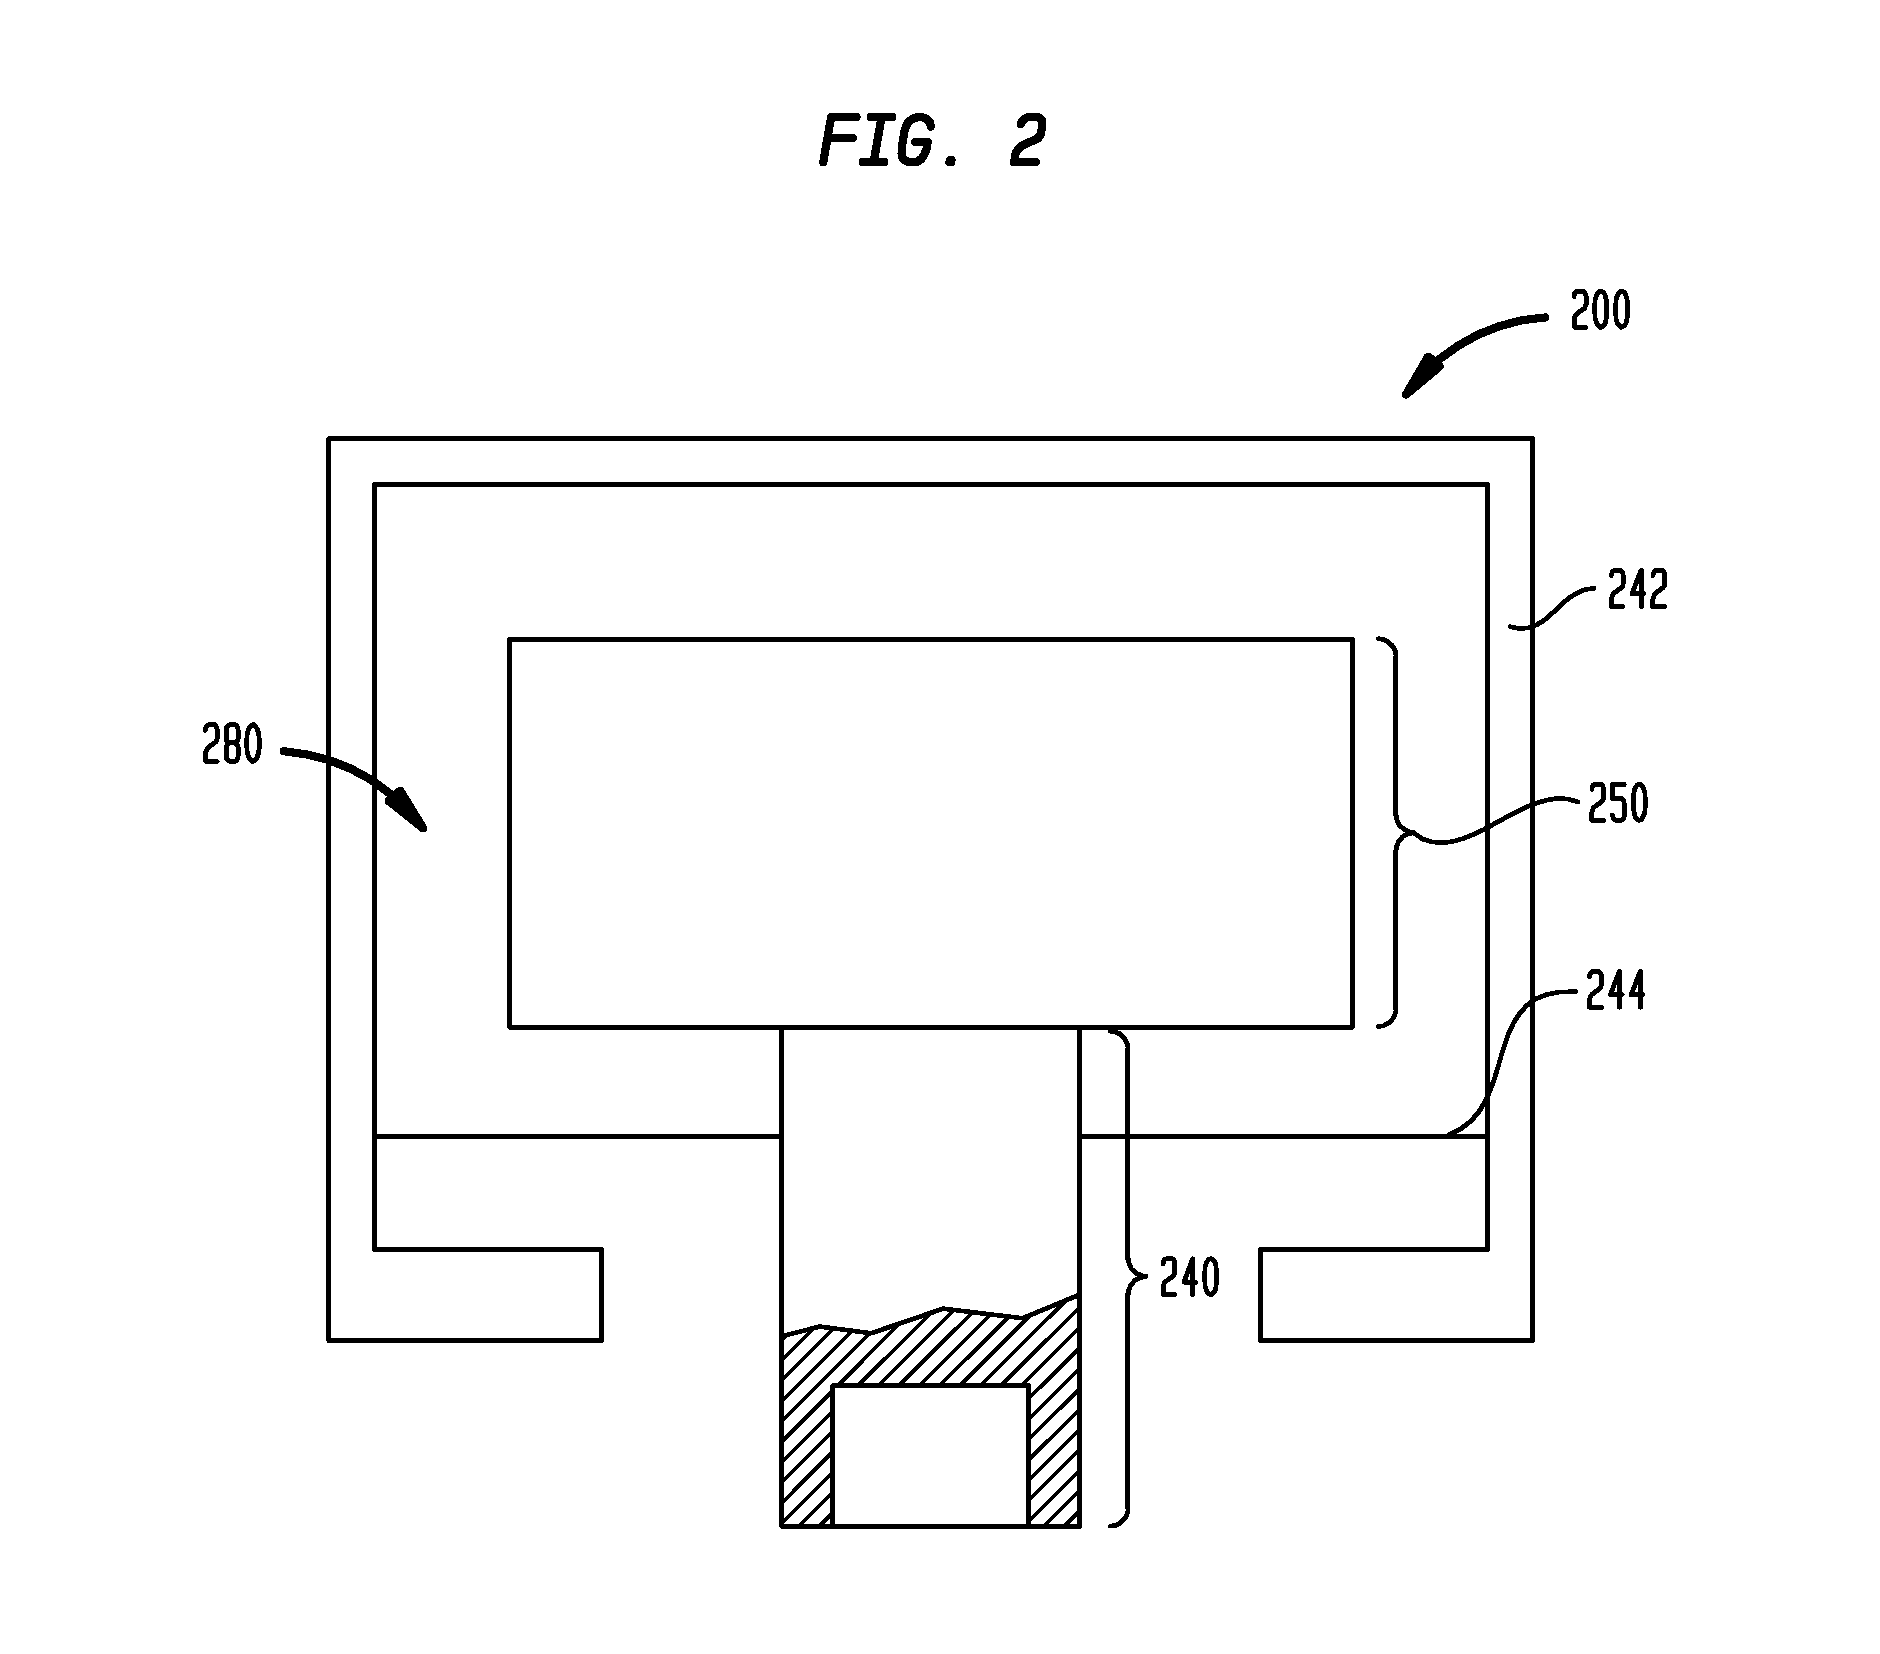 Bone conduction device including a balanced electromagnetic actuator having radial and axial air gaps